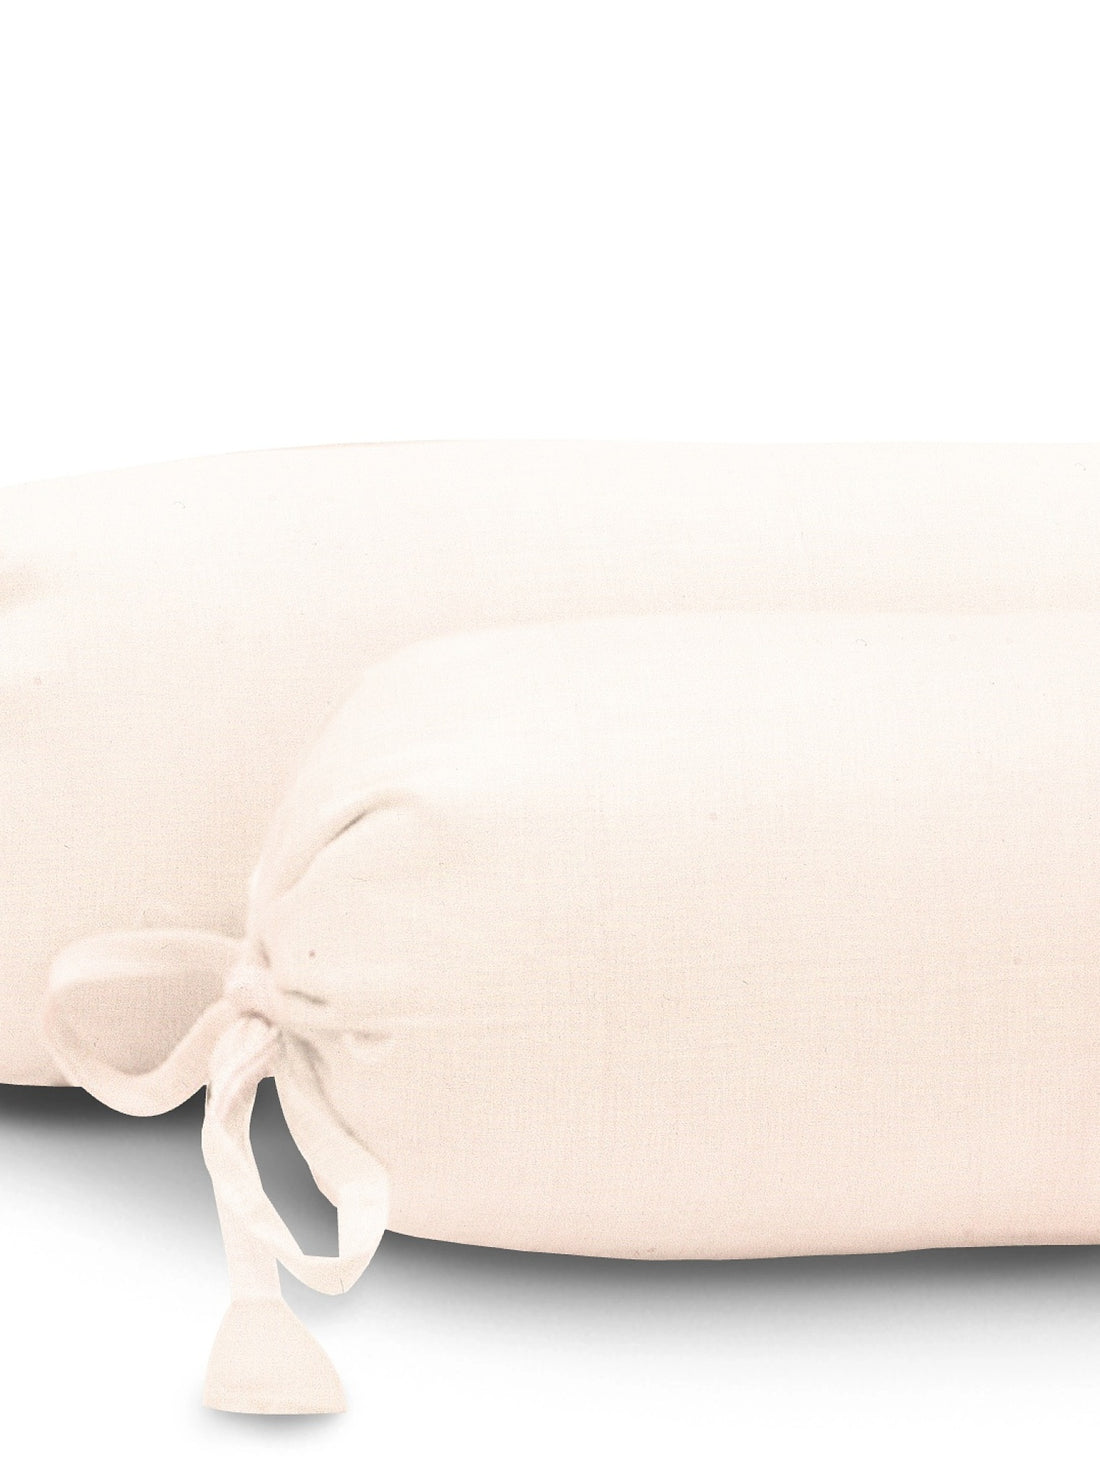 ‘Neutral Pink’ Organic Baby Bolster Cover